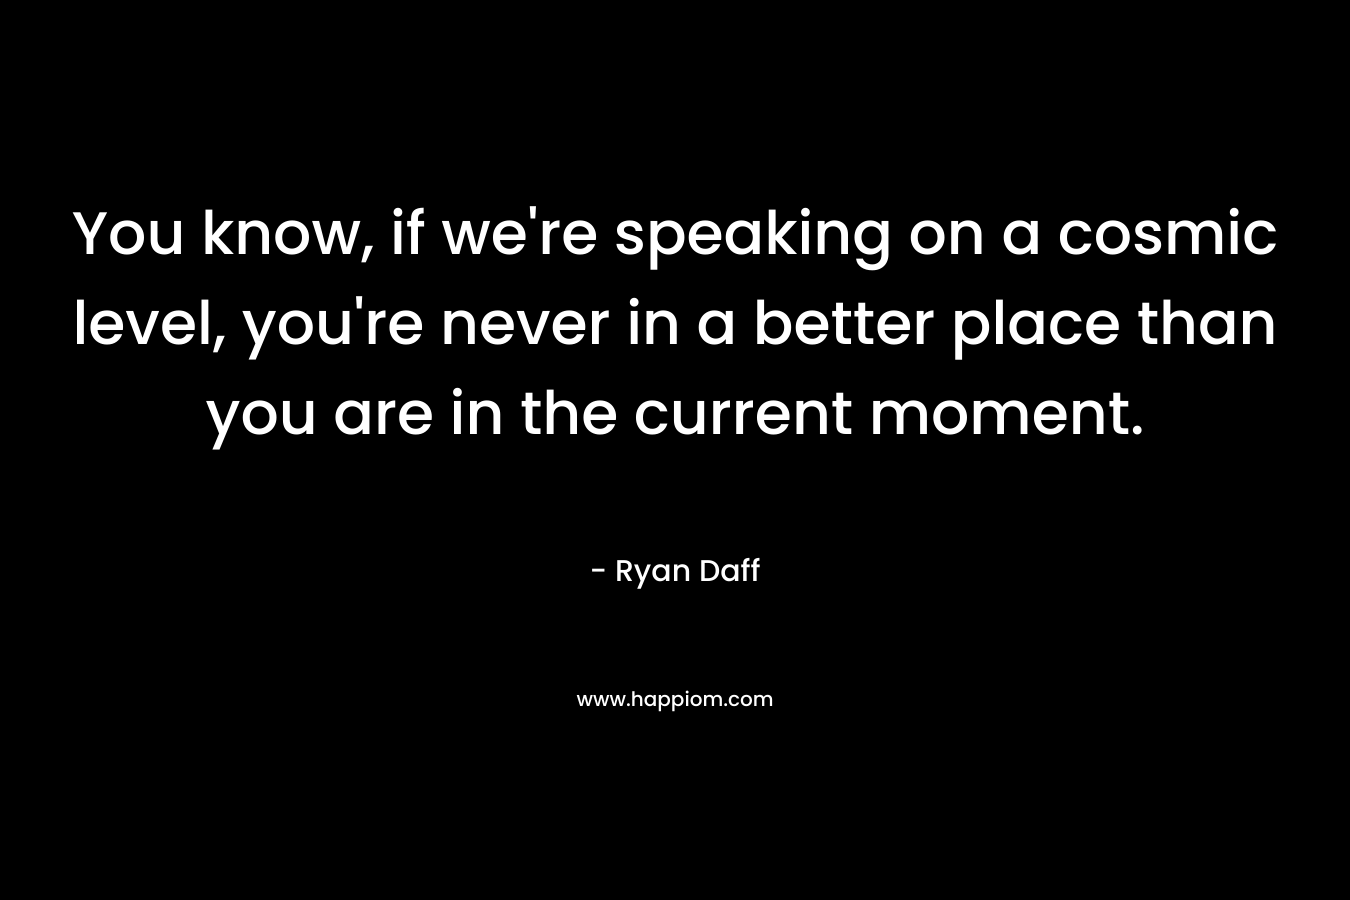 You know, if we’re speaking on a cosmic level, you’re never in a better place than you are in the current moment. – Ryan Daff